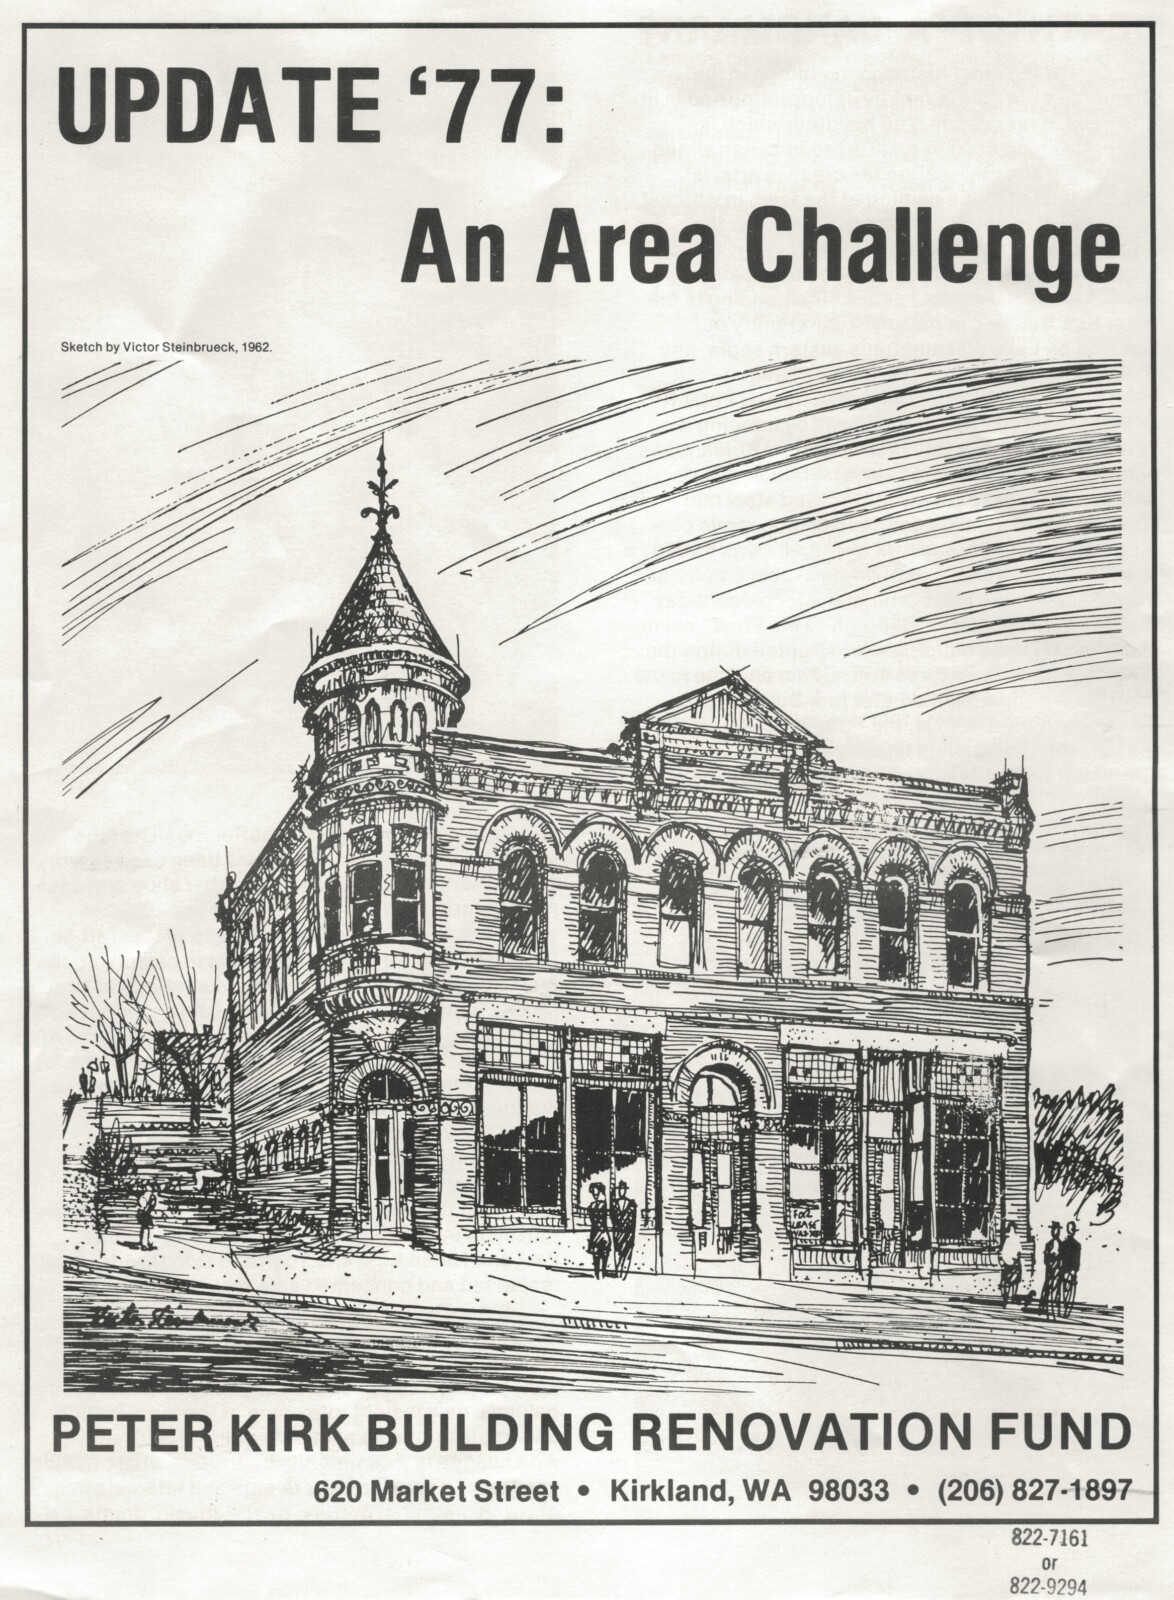 1977 Fundraising flyer for Peter Kirk Building renovation with 1962 sketch by Victor Steinbrueck